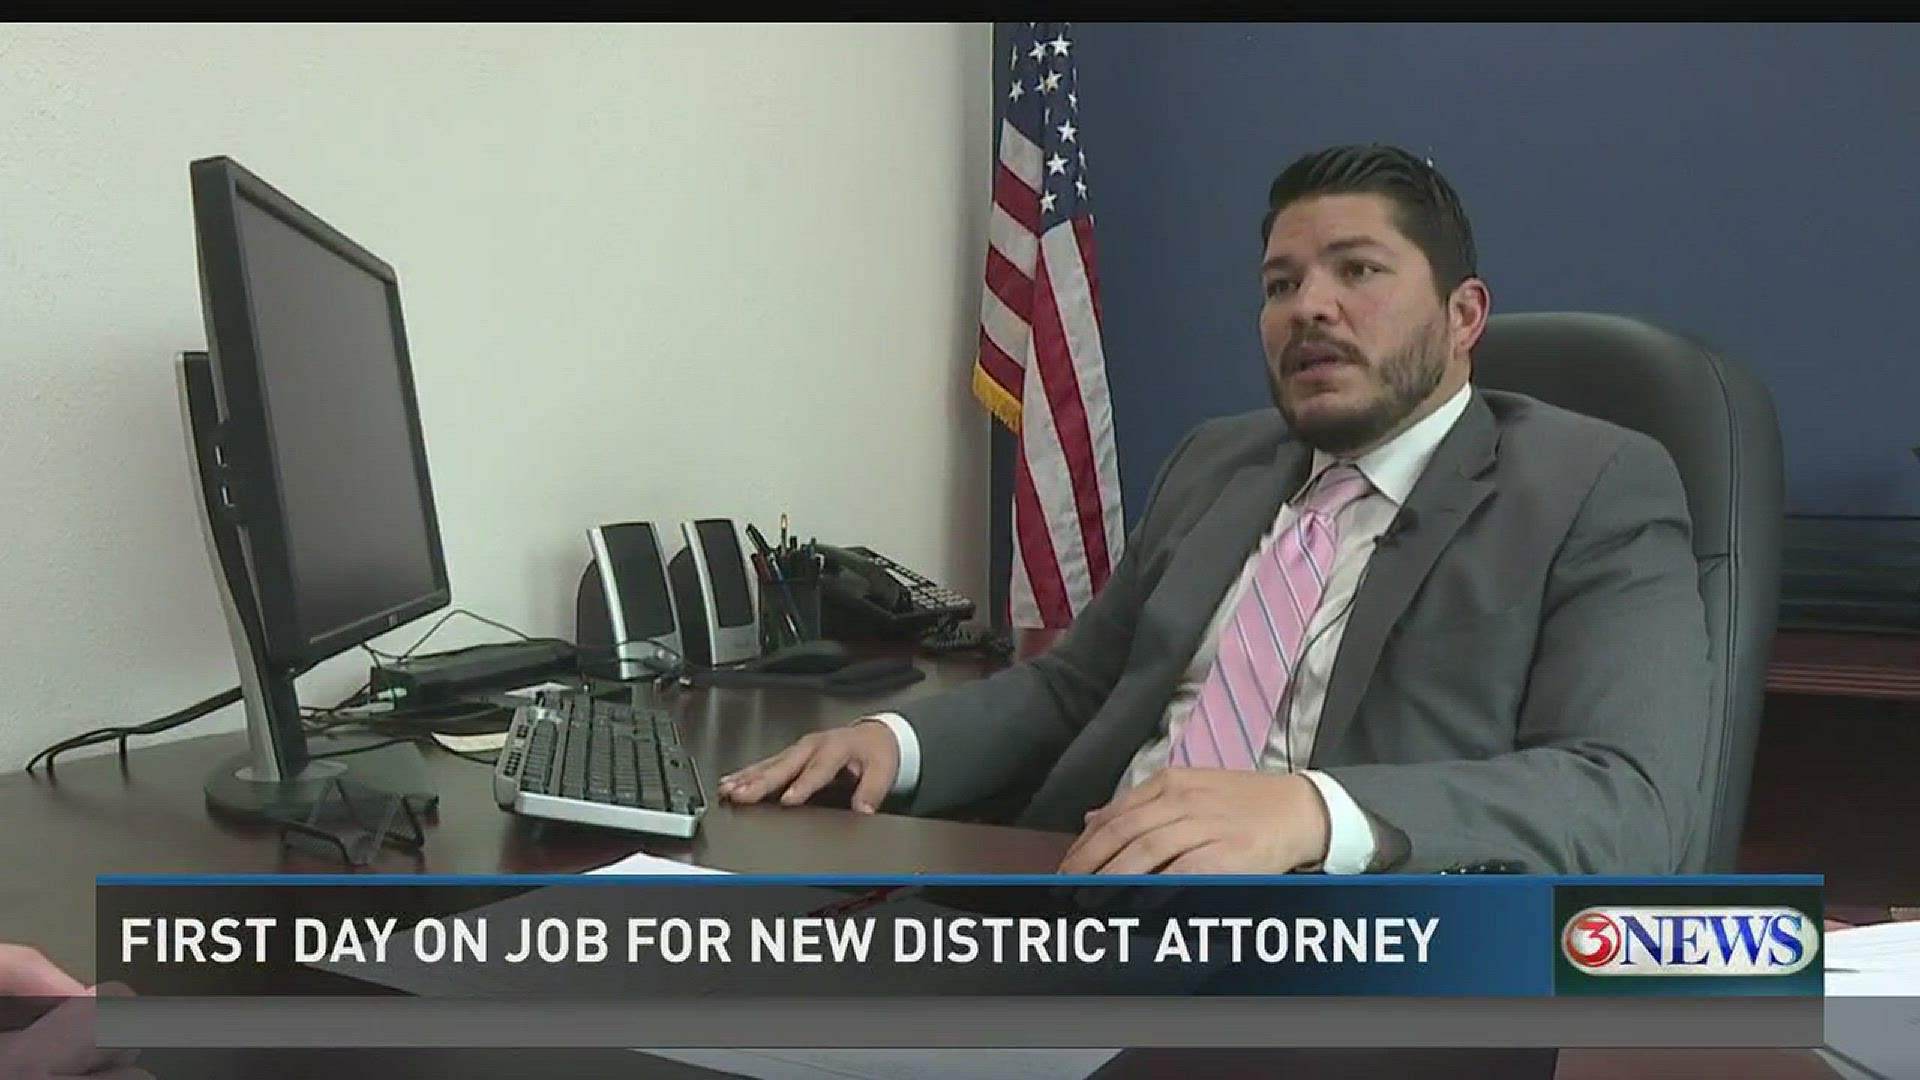 Tackling a backlog of cases - that's what Mark Gonzalez say will be his first order of business as the newly elected Nueces County District Attorney.